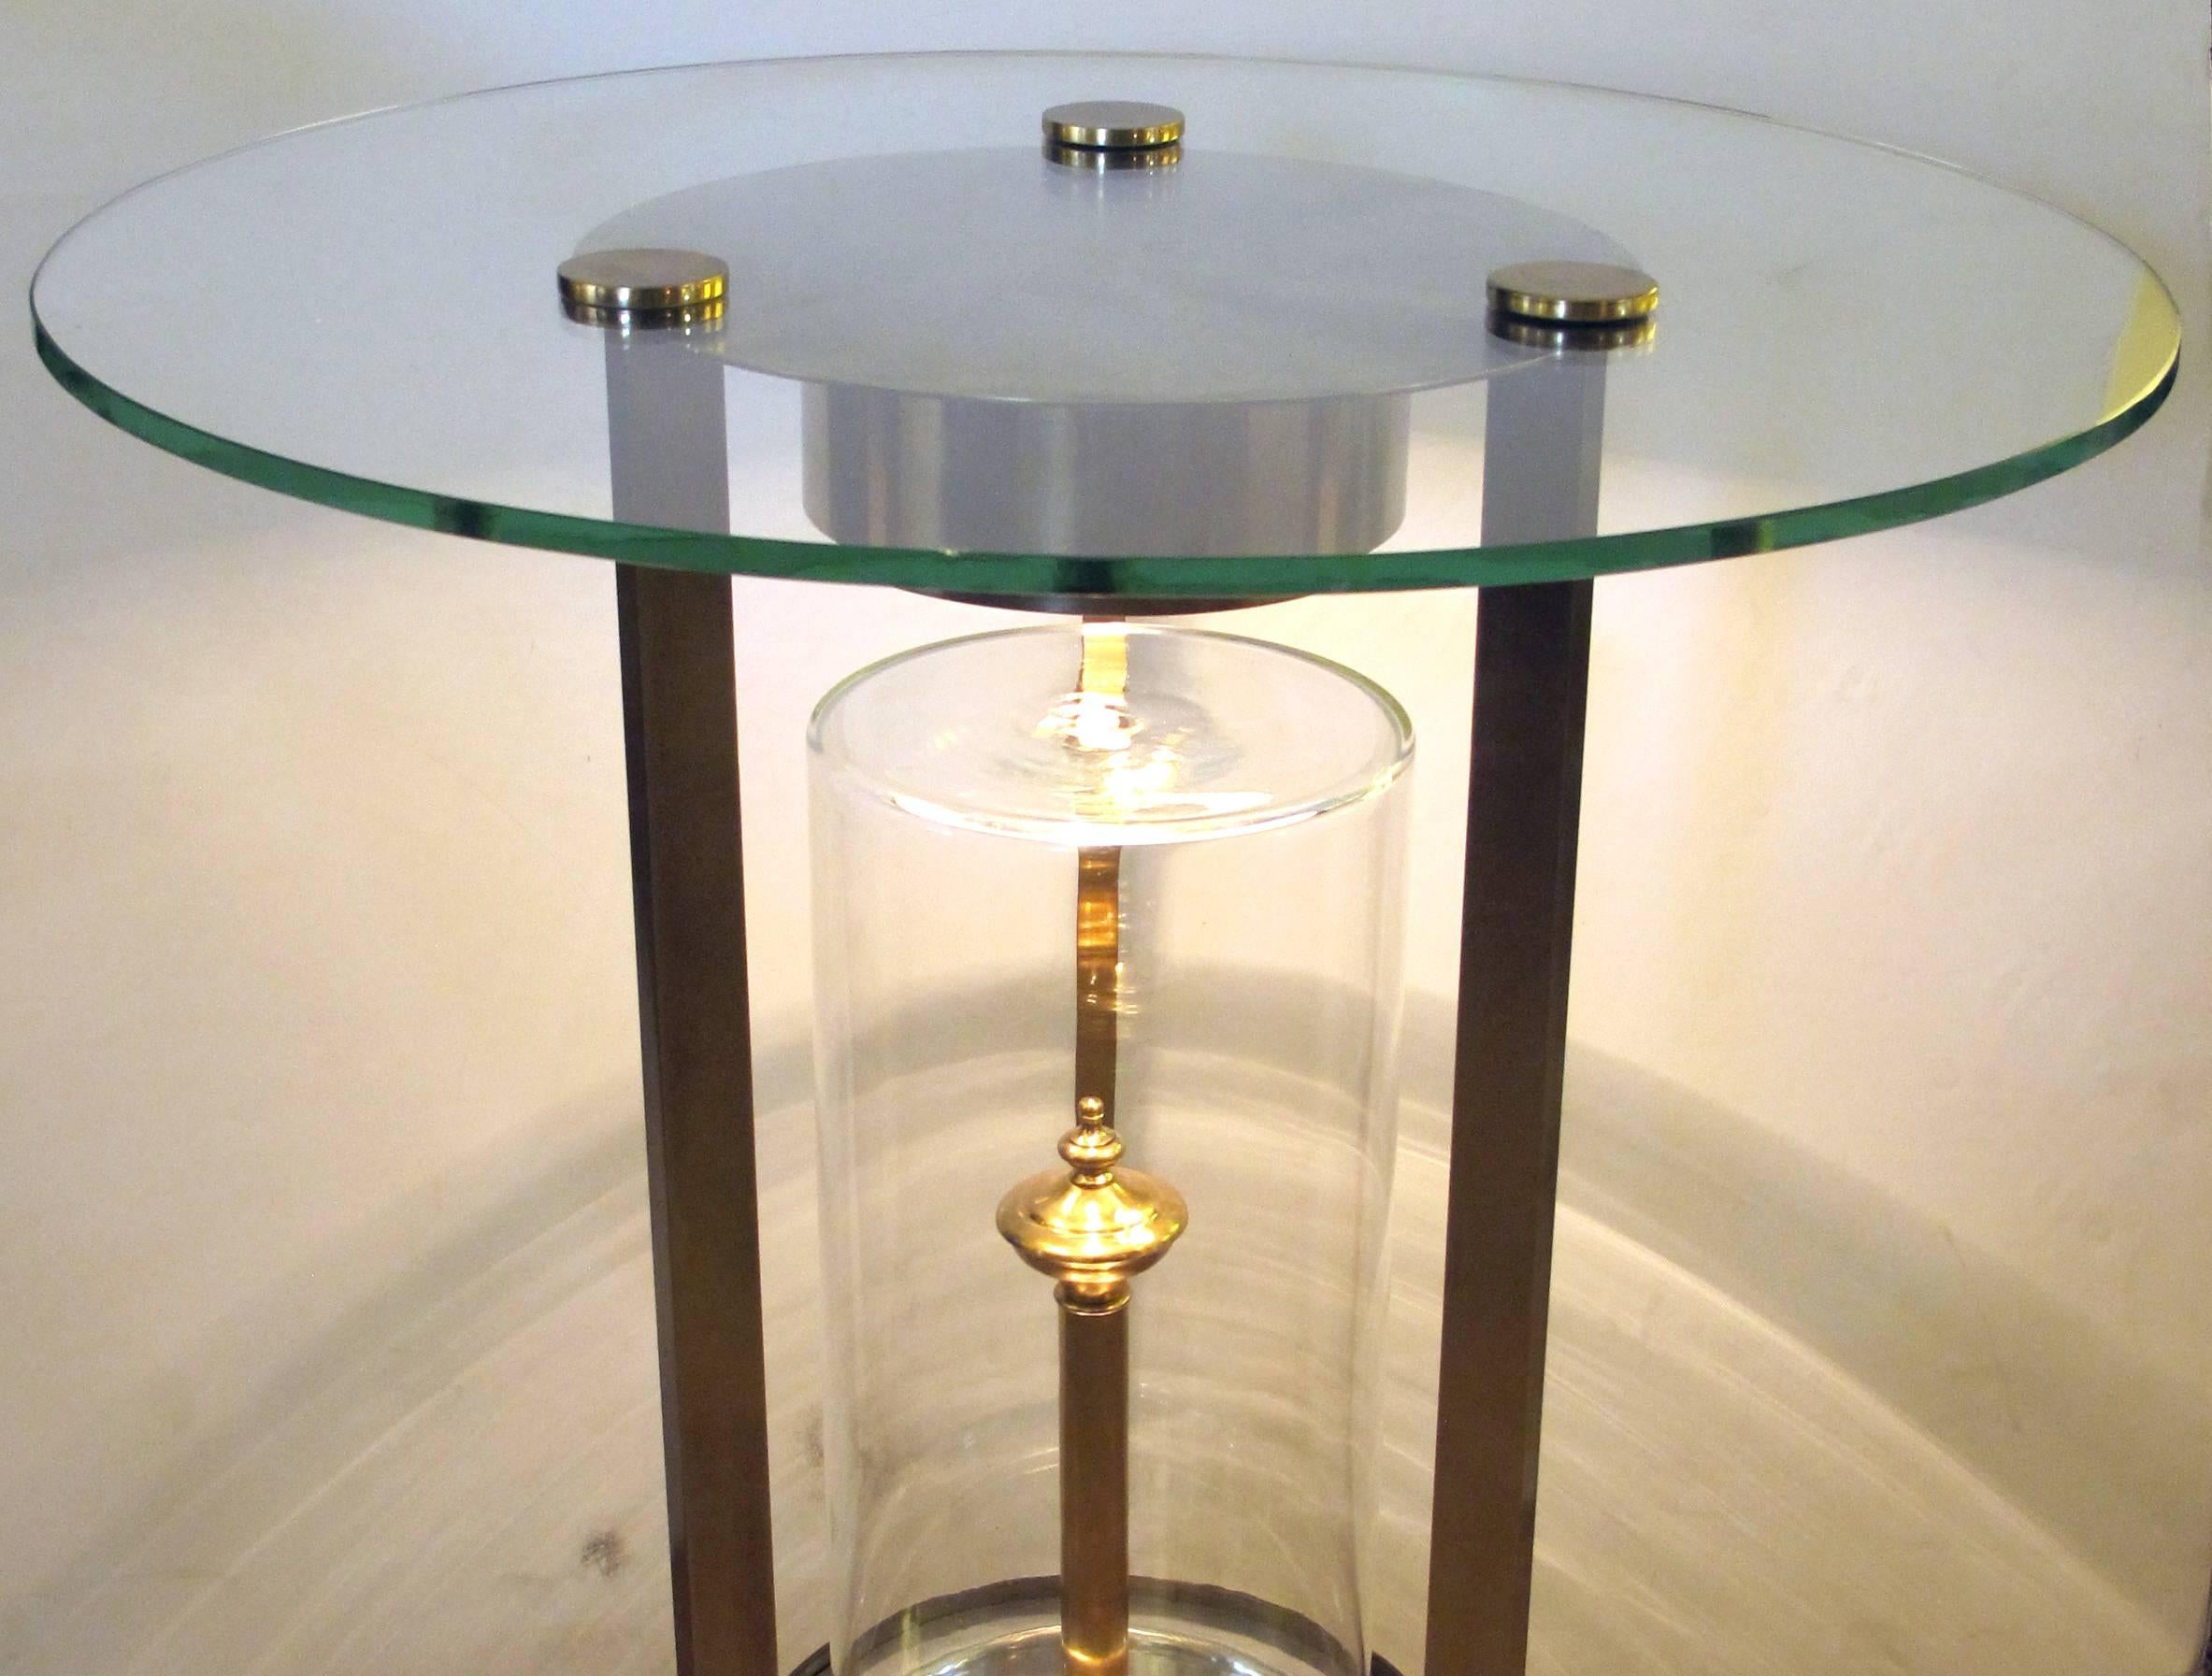 A rare pair of American, 1950s glass and brass illuminated circular side tables, designed by Dorothy Thorpe for the USS Enterprise Steamship lounge, each circular glass top secured with three solid brass discs, raised on three slender supports